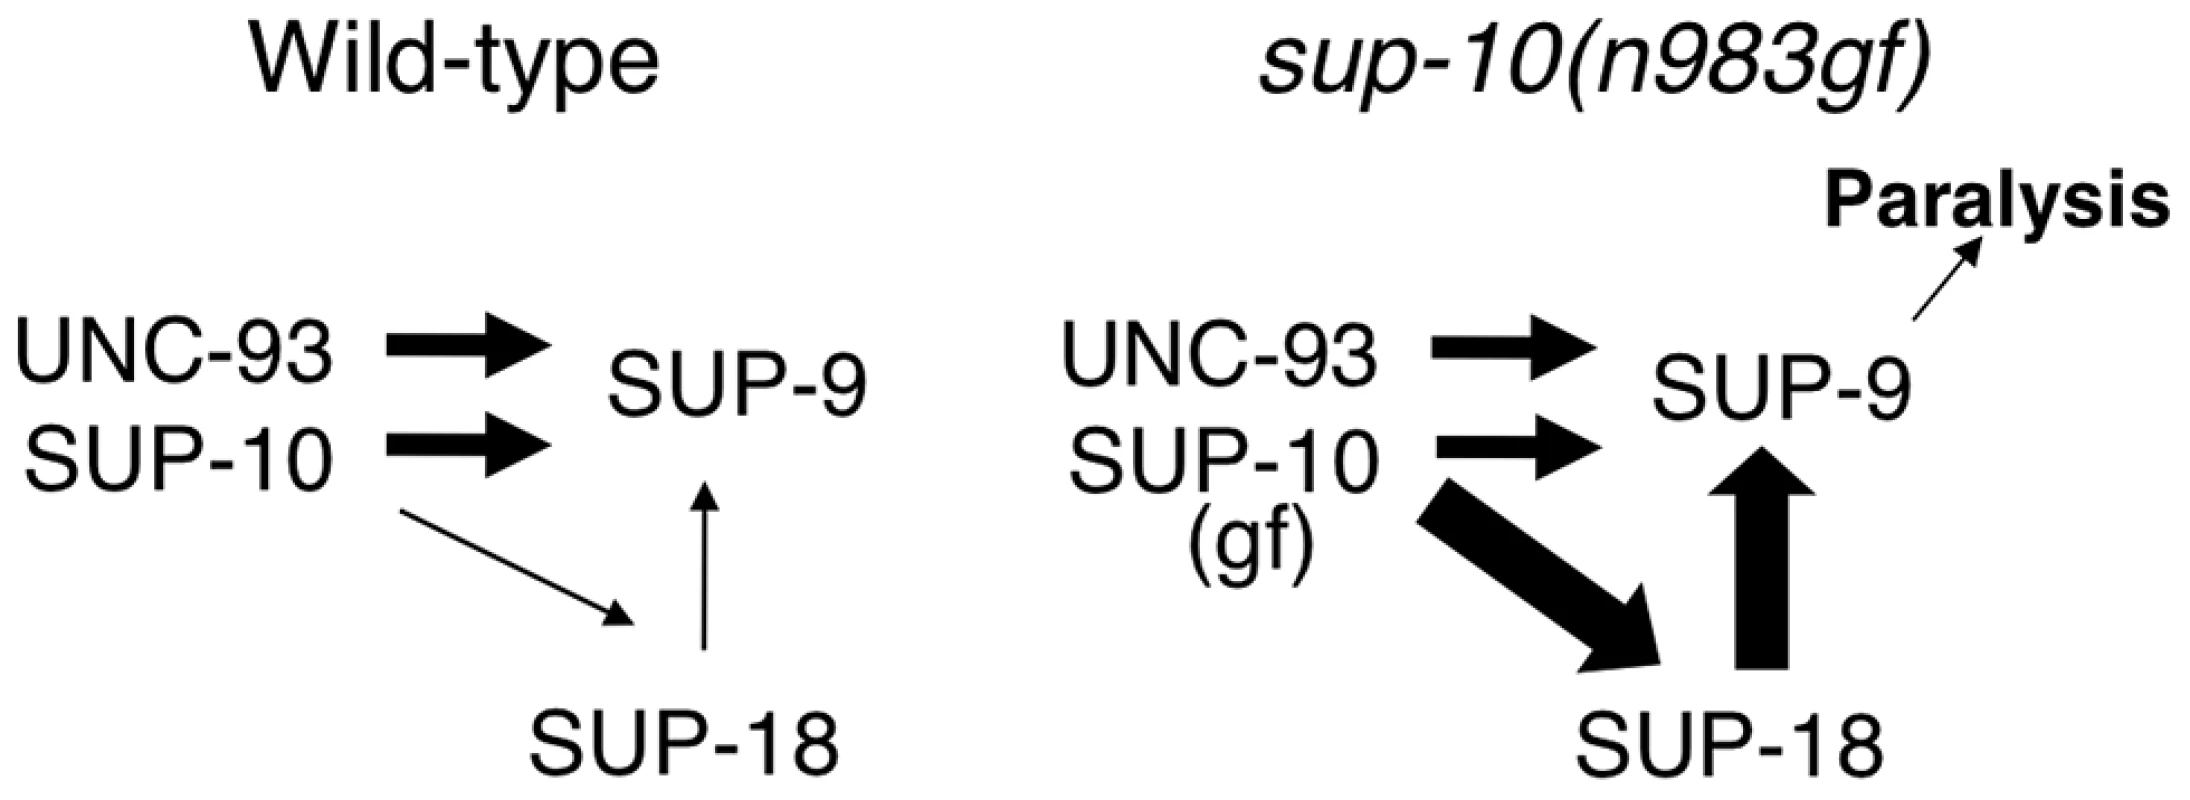 A model for activation of the SUP-9 channel by multiple subunits.